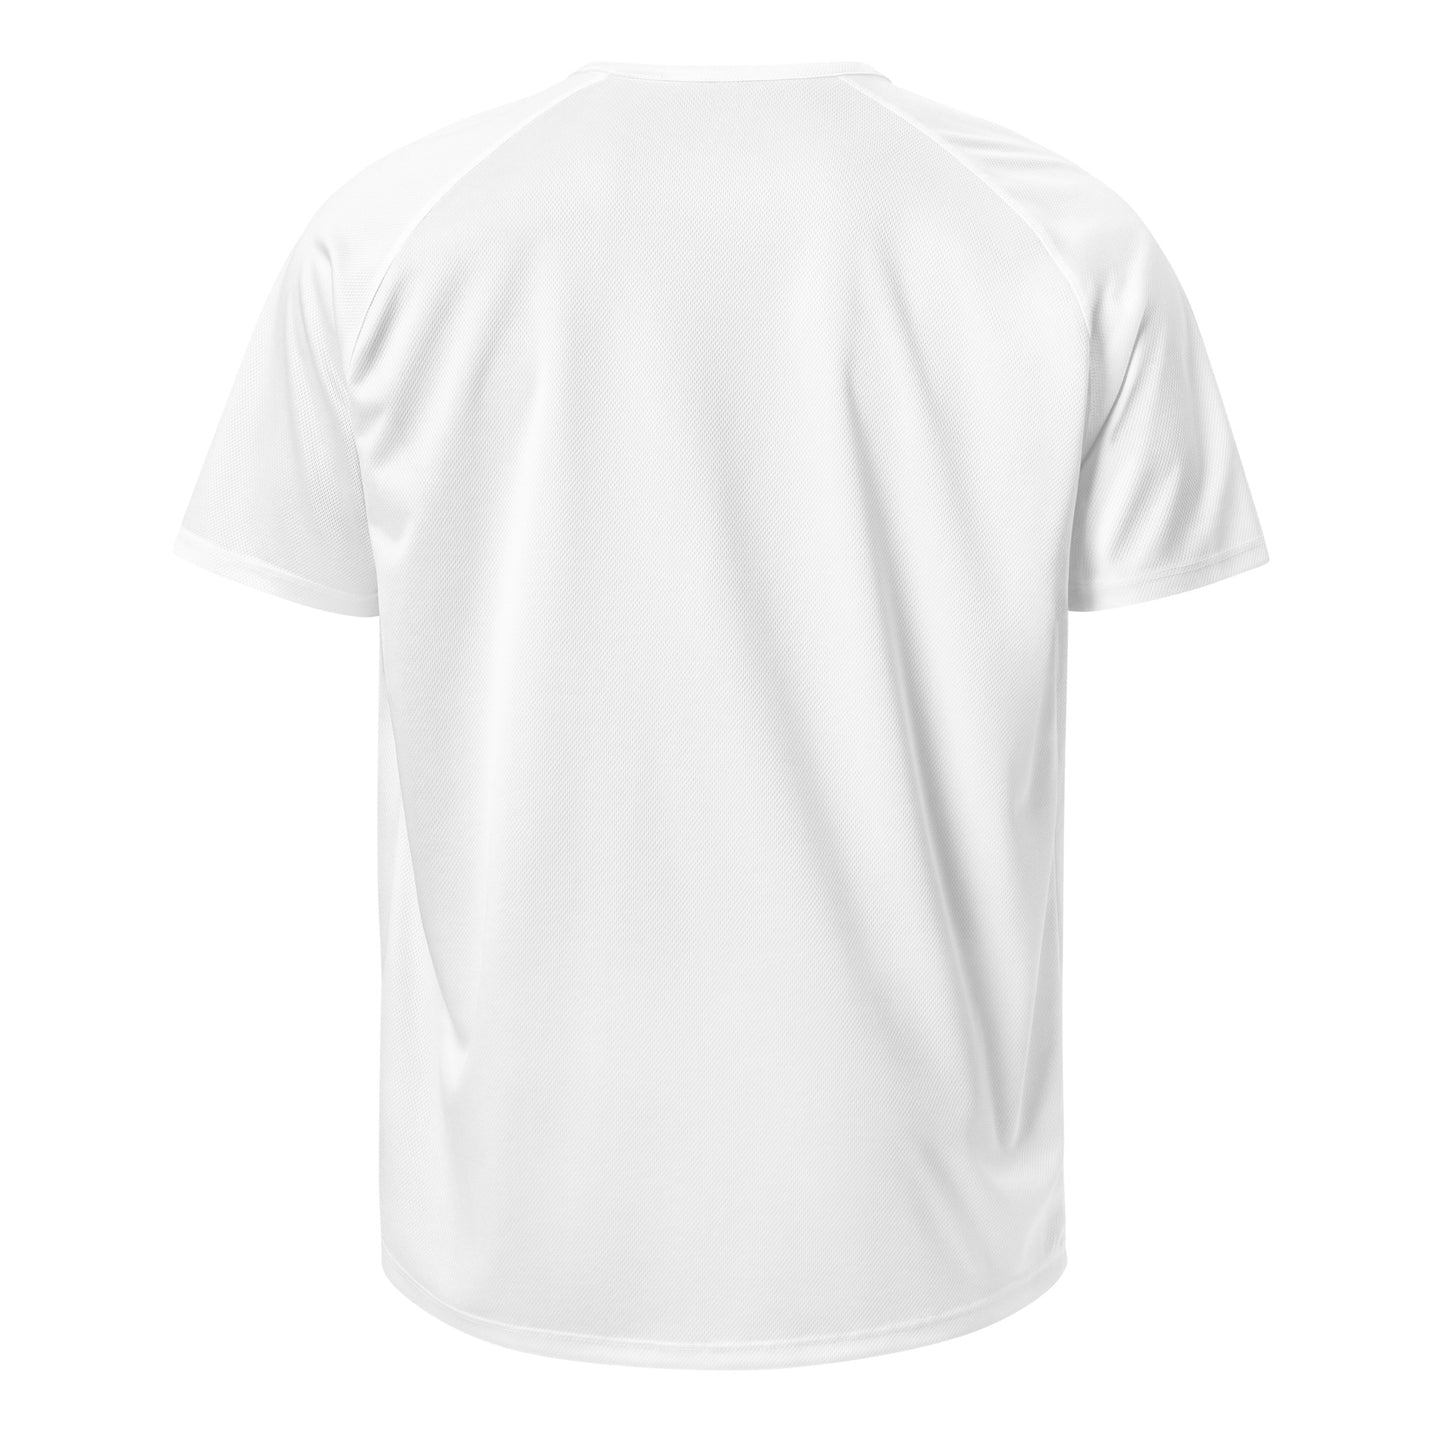 M100 - T-shirt/Sports/Breathable Fabric (Pony : White)